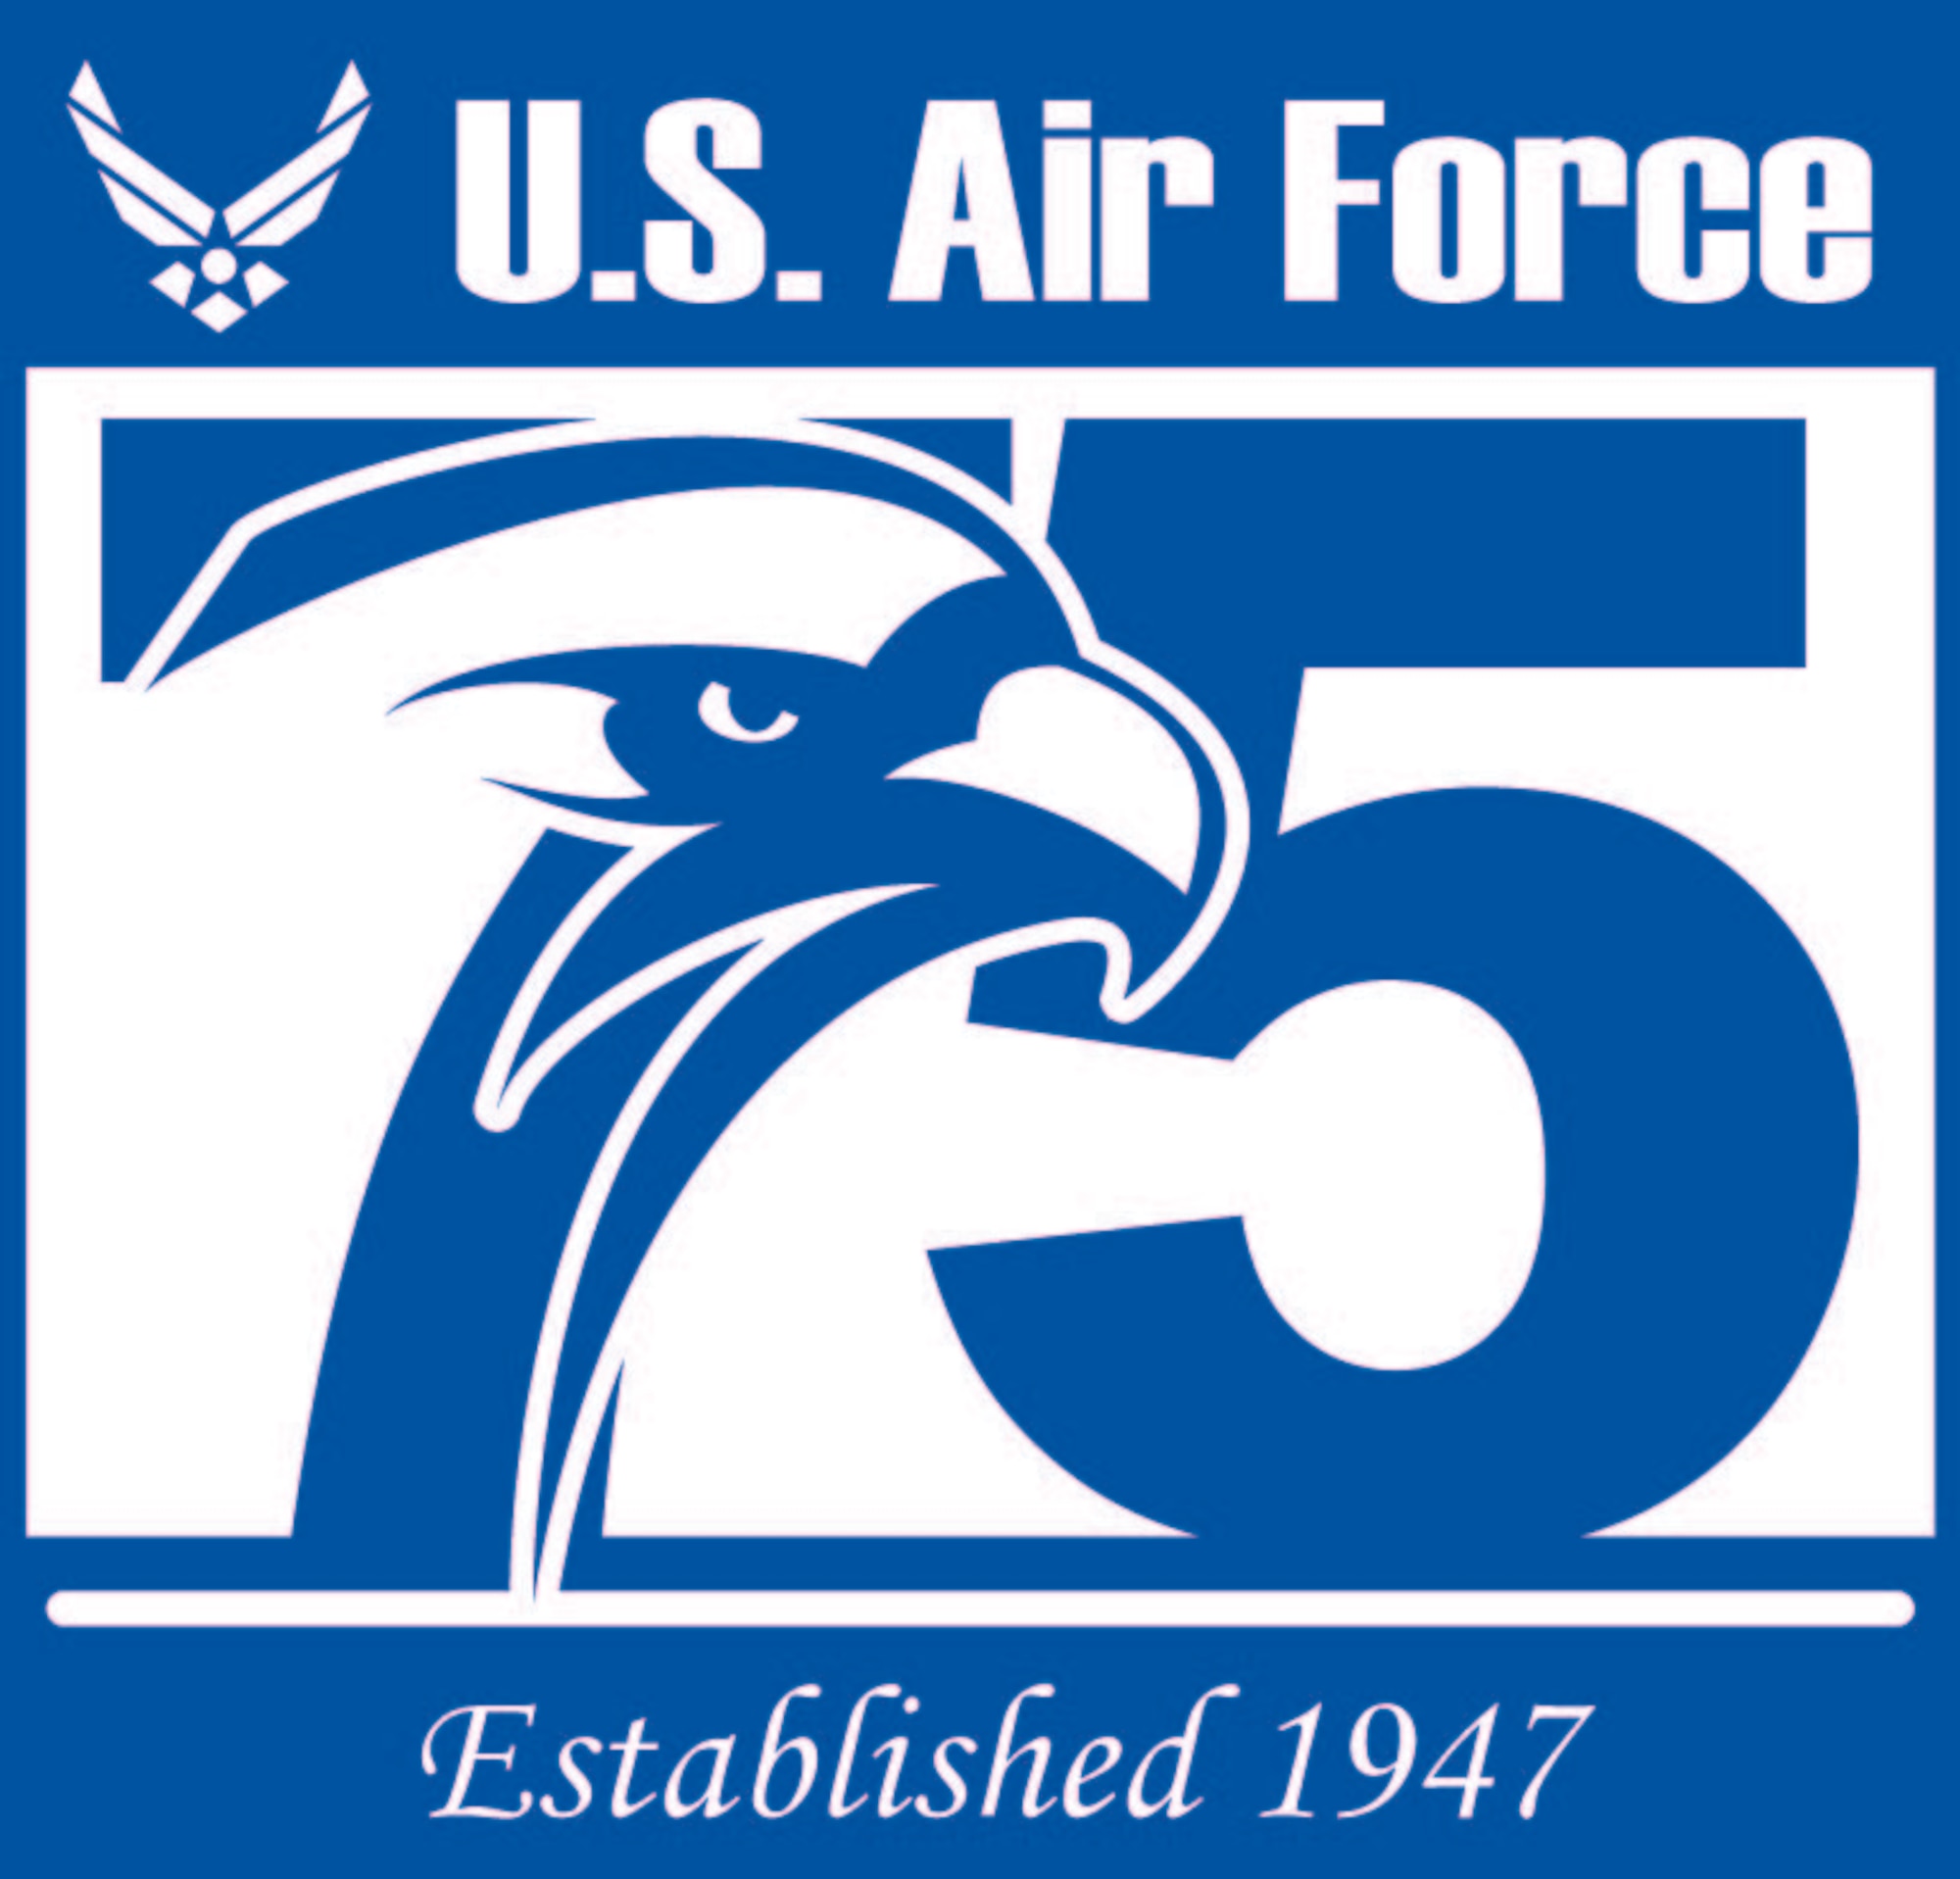 The logo of the 75th Anniversary of the U.S. Air Force.